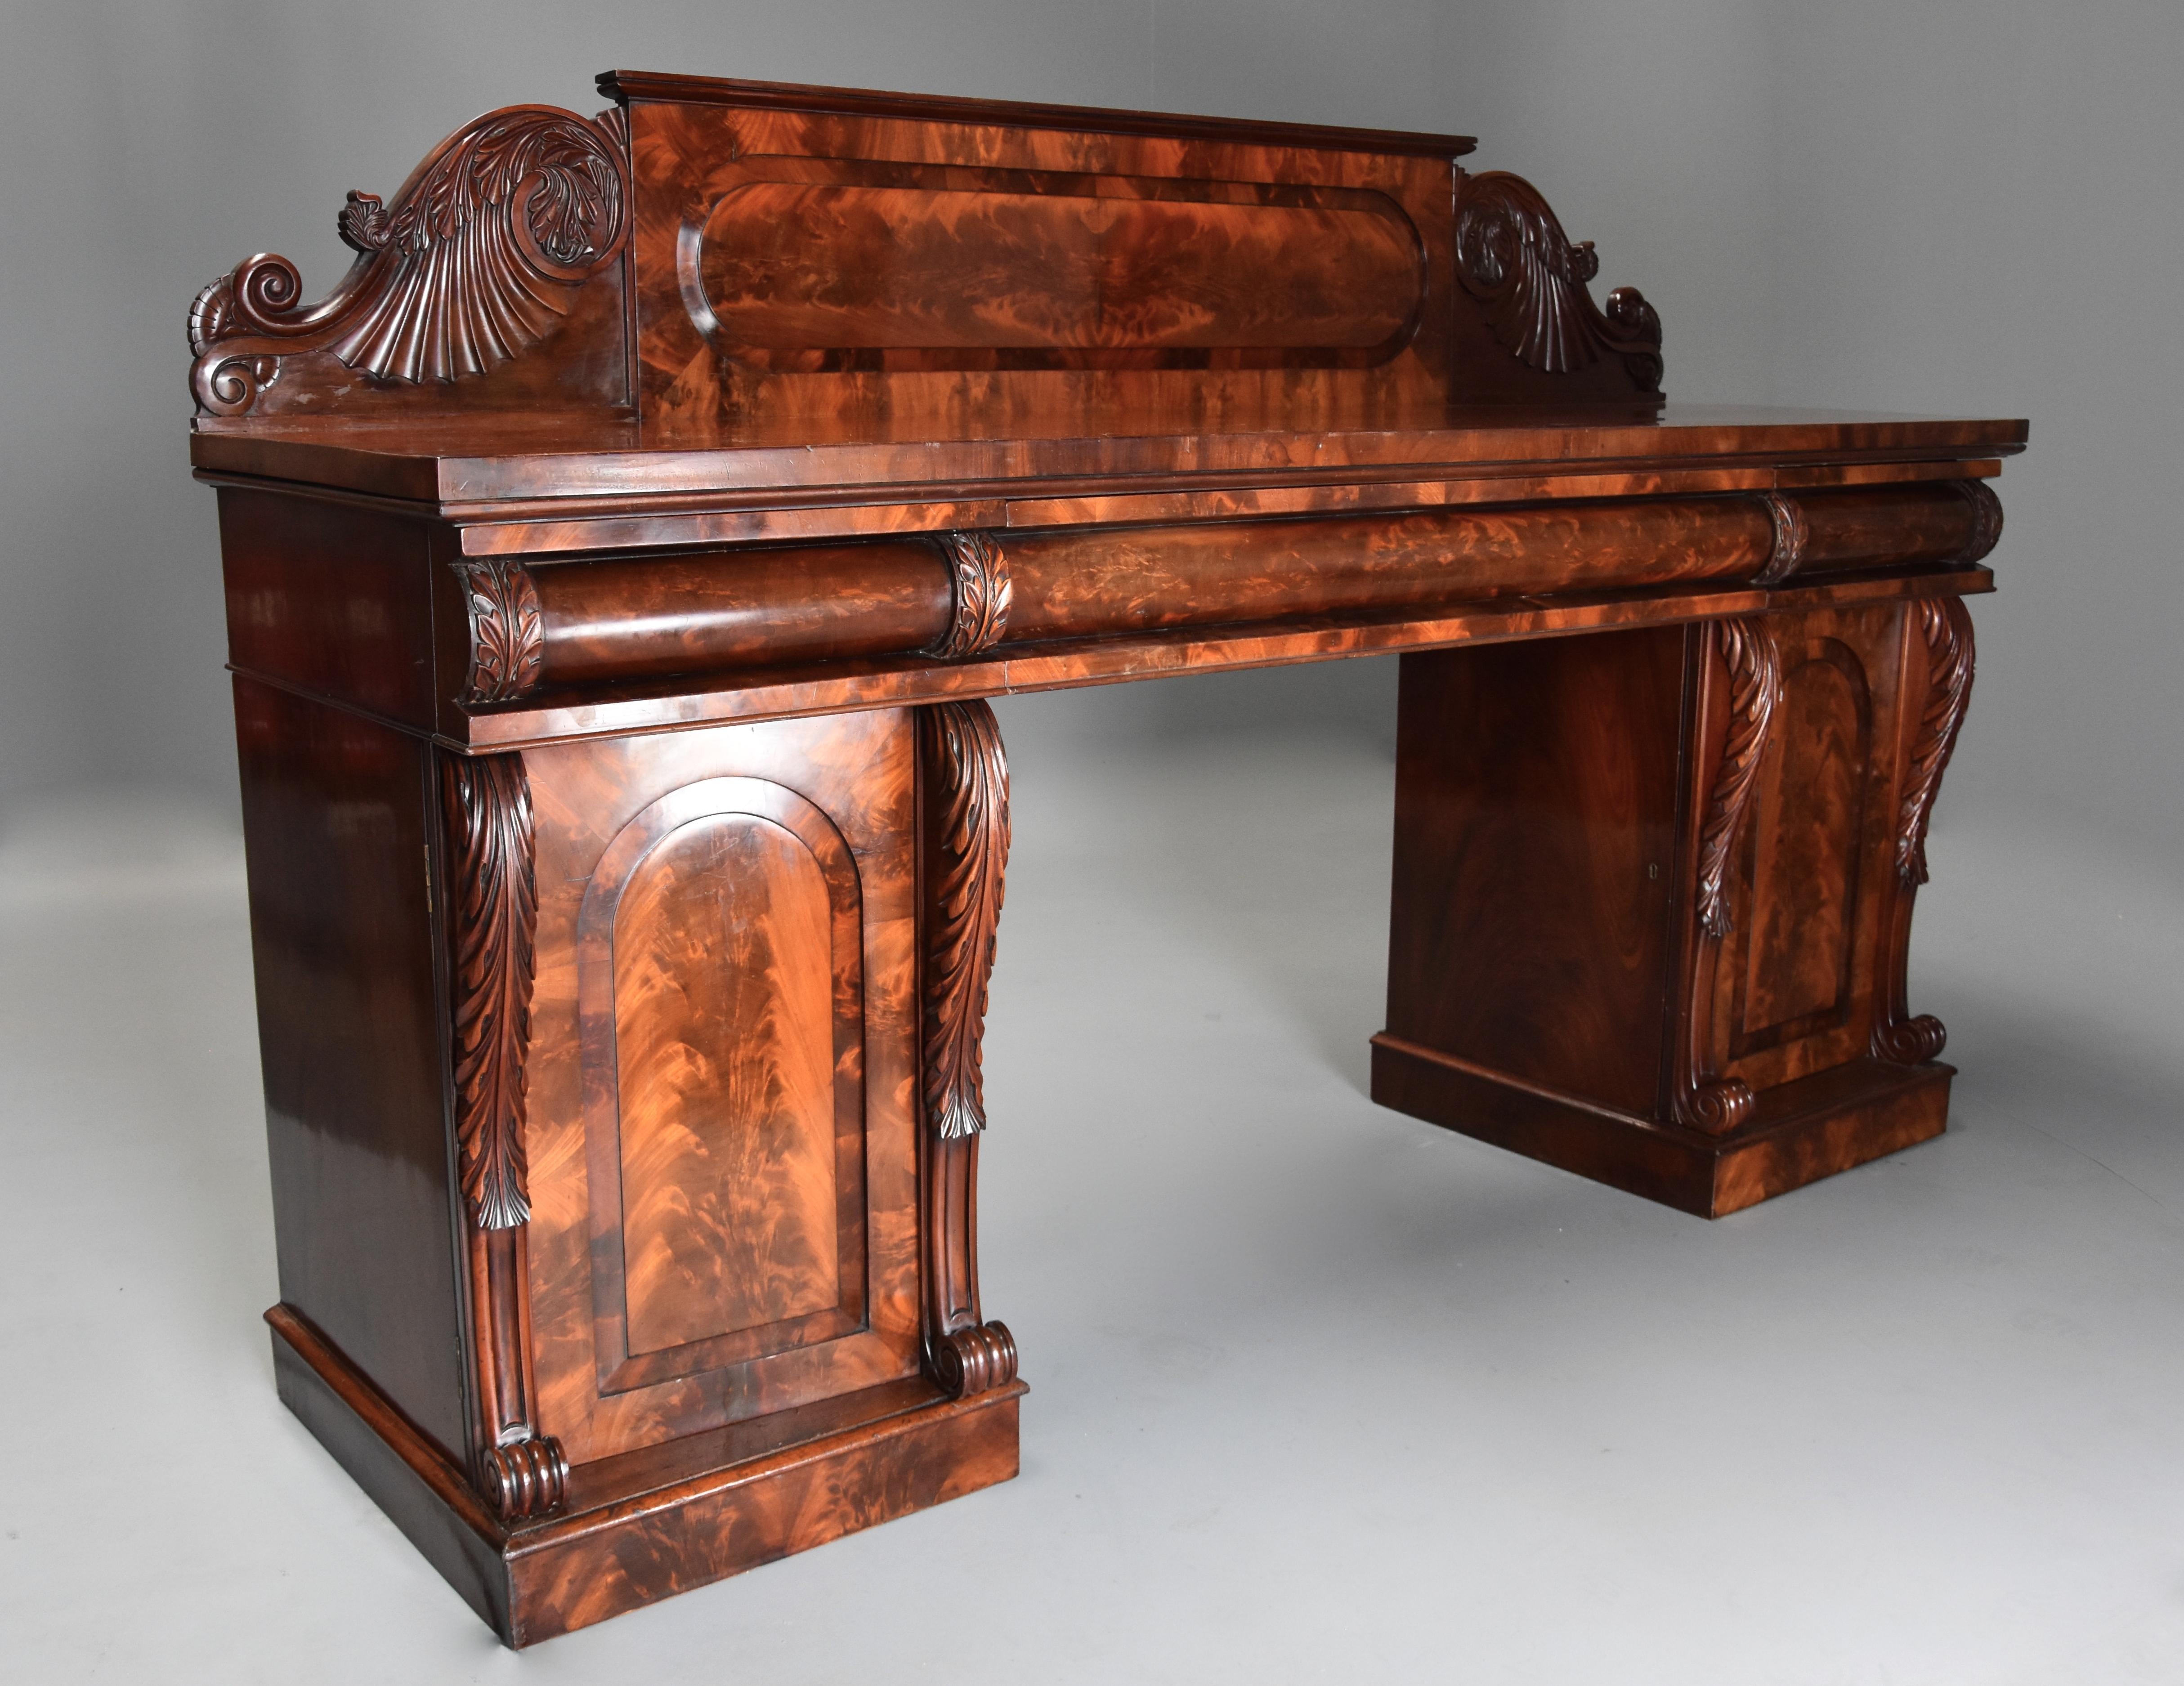 A fine quality mid-19th century (circa 1840) mahogany pedestal sideboard with superb flame mahogany veneers.

This sideboard consists of an upstand of superb quality flame mahogany veneer with recessed oblong panel with rounded ends with finely